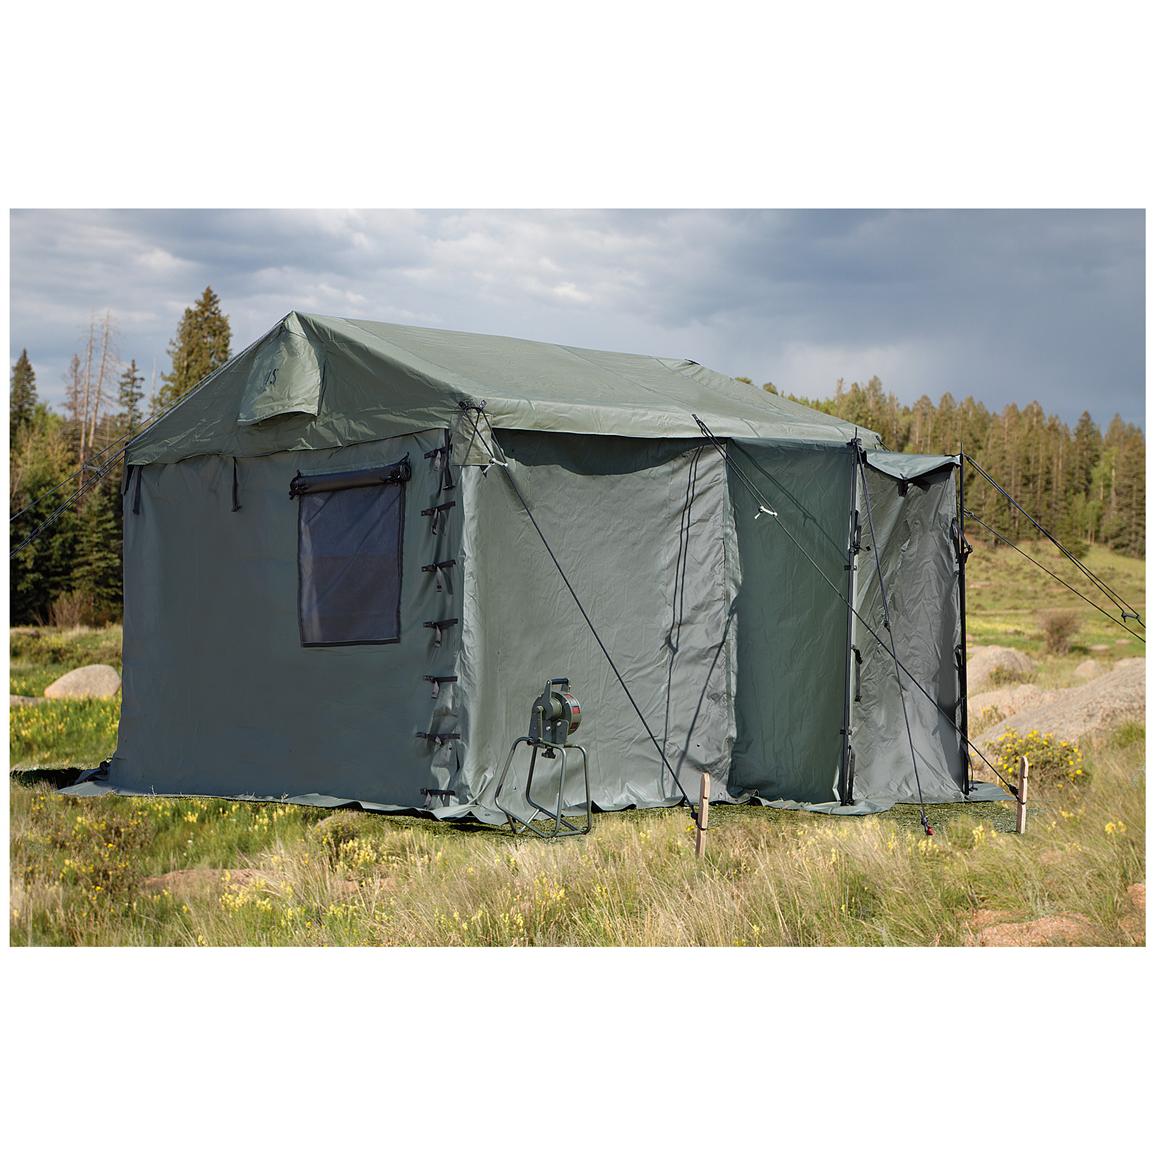 Waterproof Army Tent - Army Military